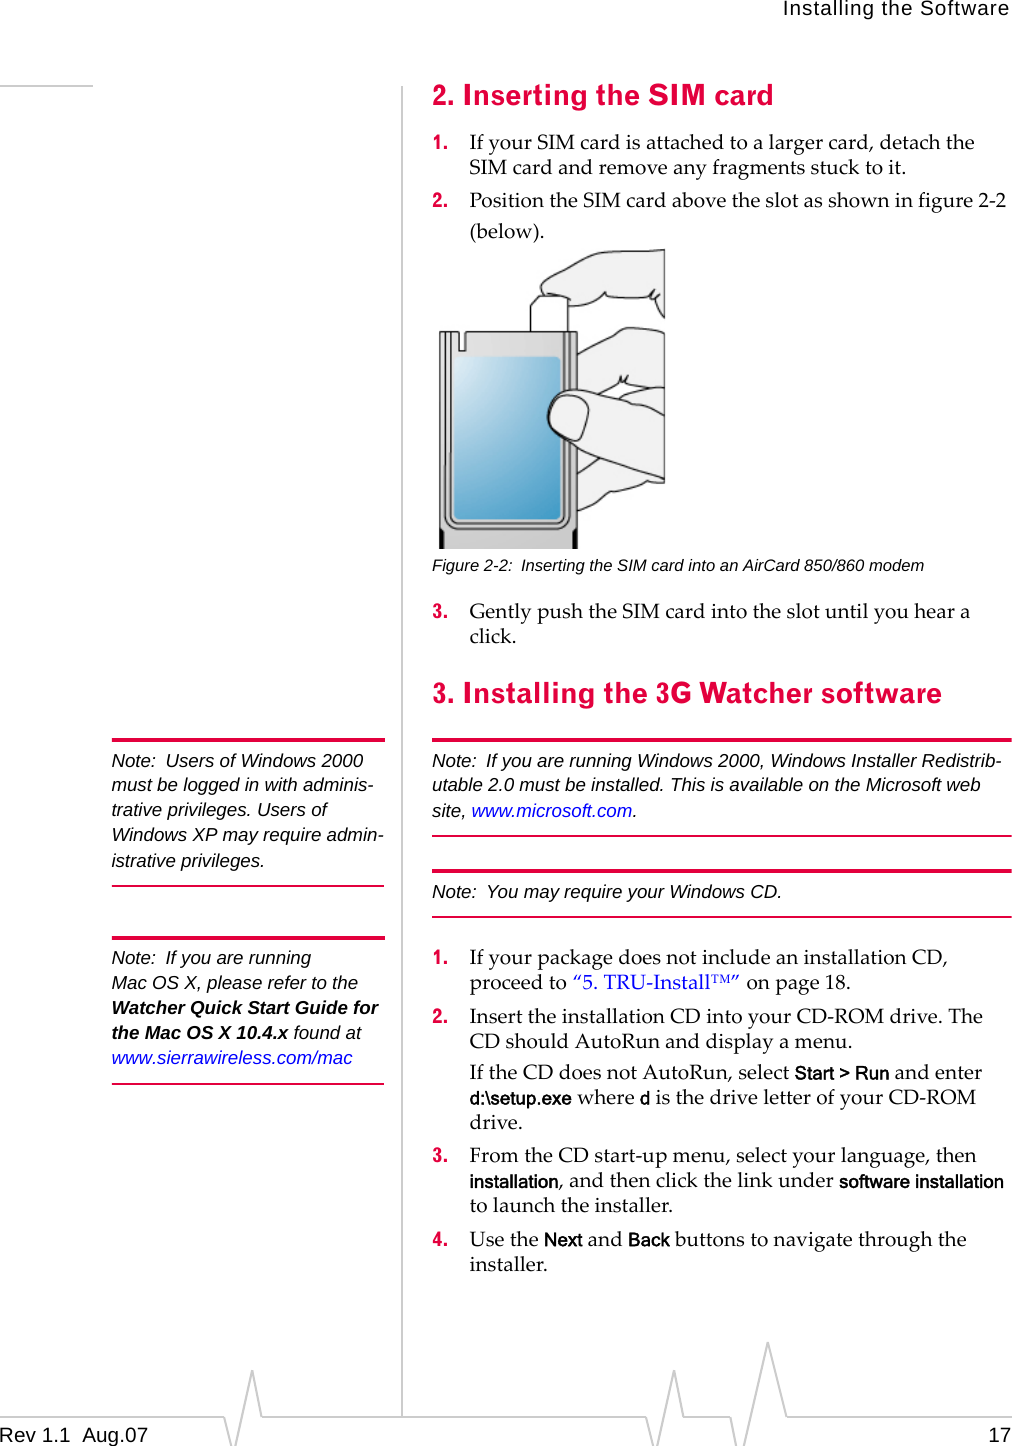 Installing the Software Note:  Users of Windows 2000 must be logged in with adminis-trative privileges. Users of Windows XP may require admin-istrative privileges. Note:  If you are running Mac OS X, please refer to the Watcher Quick Start Guide for the Mac OS X 10.4.x found at www.sierrawireless.com/mac 2. Inserting the SIM card 1.  If your SIM card is attached to a larger card, detach the SIM card and remove any fragments stuck to it. 2.  Position the SIM card above the slot as shown in figure 2-2 (below). Figure 2-2:  Inserting the SIM card into an AirCard 850/860 modem 3.  Gently push the SIM card into the slot until you hear a click. 3. Installing the 3G Watcher software Note:  If you are running Windows 2000, Windows Installer Redistrib-utable 2.0 must be installed. This is available on the Microsoft web site, www.microsoft.com. Note:  You may require your Windows CD. 1.  If your package does not include an installation CD, proceed to “5. TRU-Install™” on page 18. 2.  Insert the installation CD into your CD-ROM drive. The CD should AutoRun and display a menu. If the CD does not AutoRun, select Start &gt; Run and enter  d:\setup.exe where d is the drive letter of your CD-ROM  drive. 3.  From the CD start-up menu, select your language, then installation, and then click the link under software installation to launch the installer. 4.  Use the Next and Back buttons to navigate through the installer. Rev 1.1  Aug.07  17 